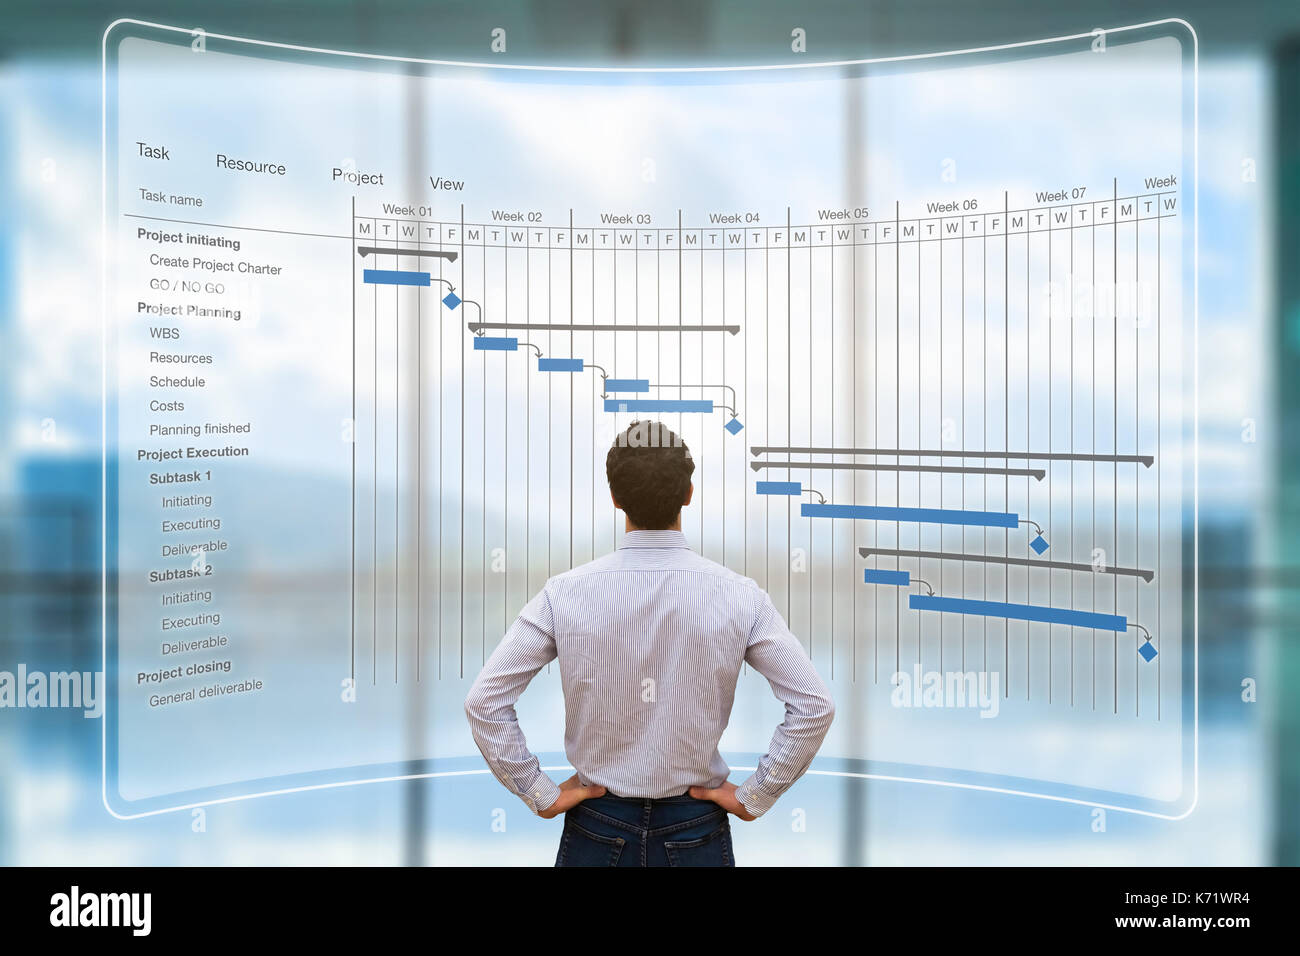 Project manager looking at AR screen with Gantt chart schedule or planning showing tasks and deadlines Stock Photo